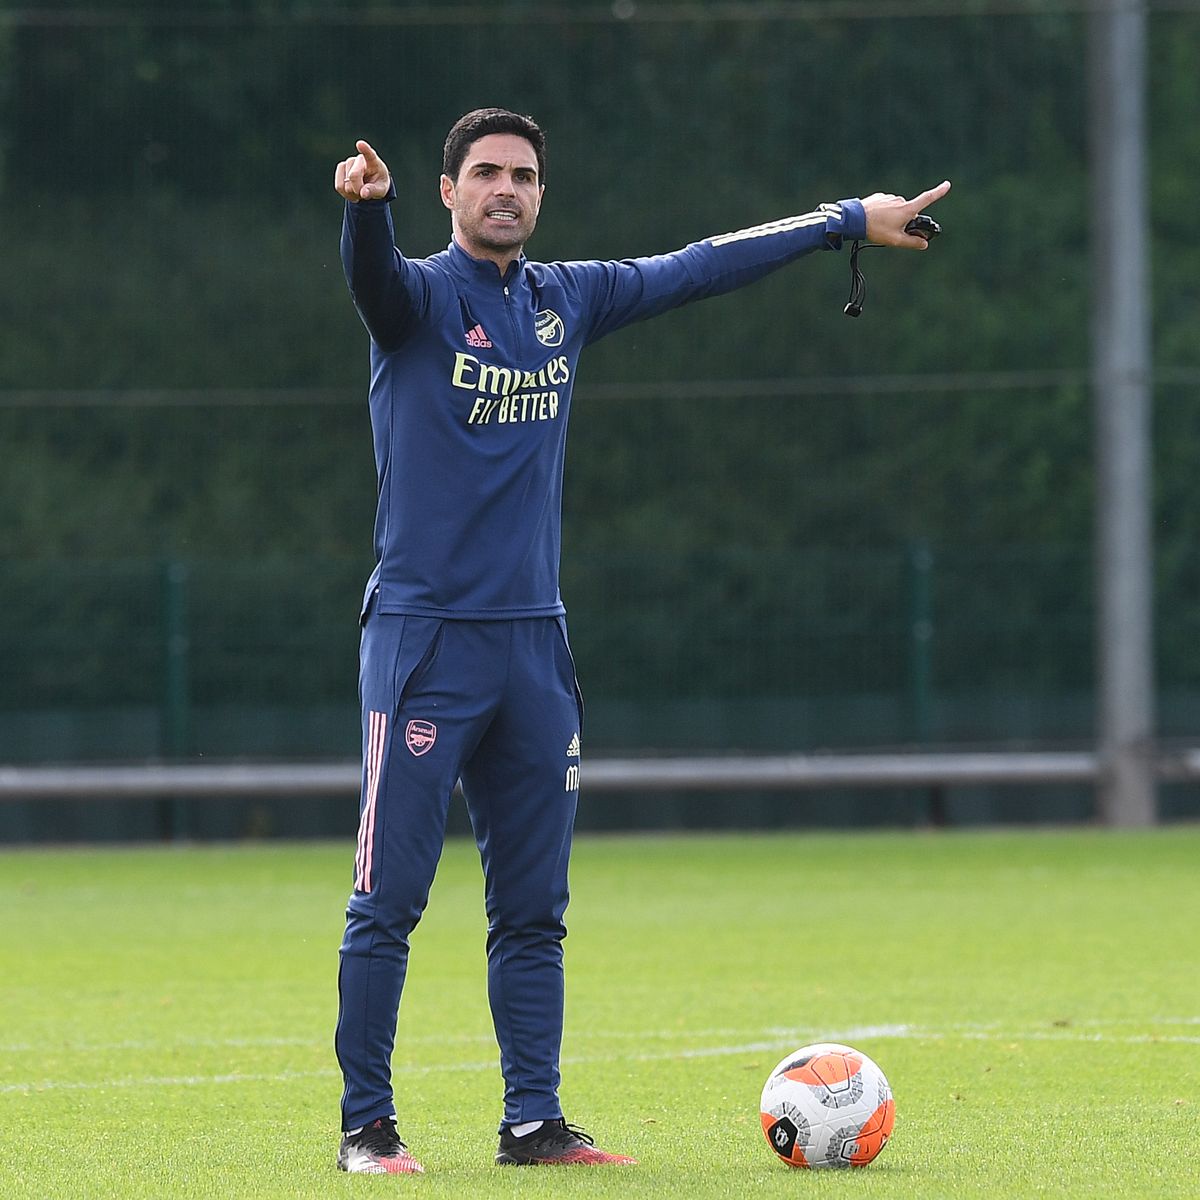 On how Arsenal train and prepare:“The beginning of each session focuses on certain skill development around a specific theme. The middle bulk of the session is around the manager’s ideas of how we play; our methodology, this is how we play, this is what we do.”